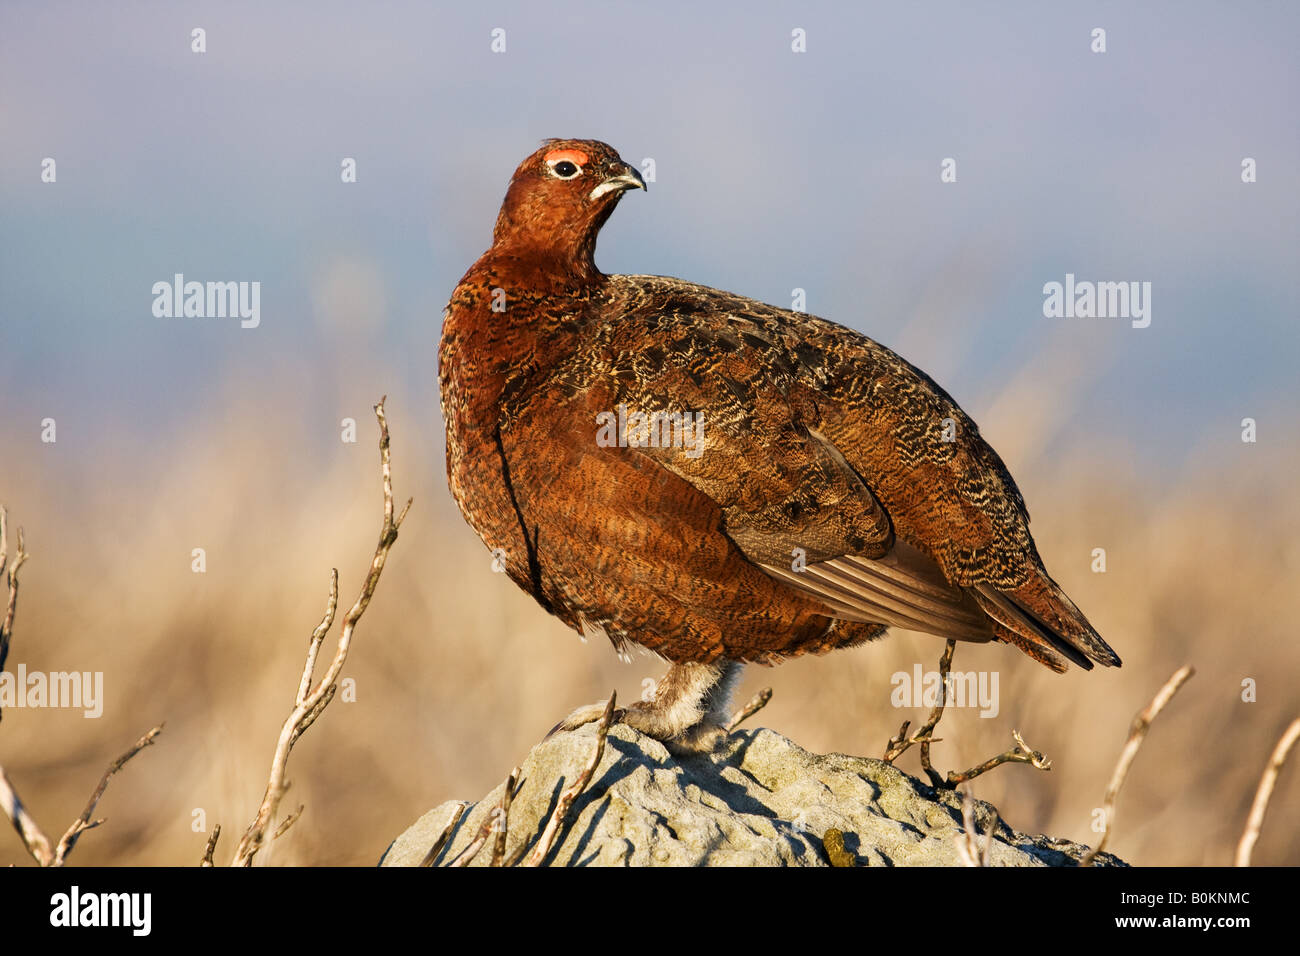 male Red Grouse in breeding plumage standing on a rock. Stock Photo